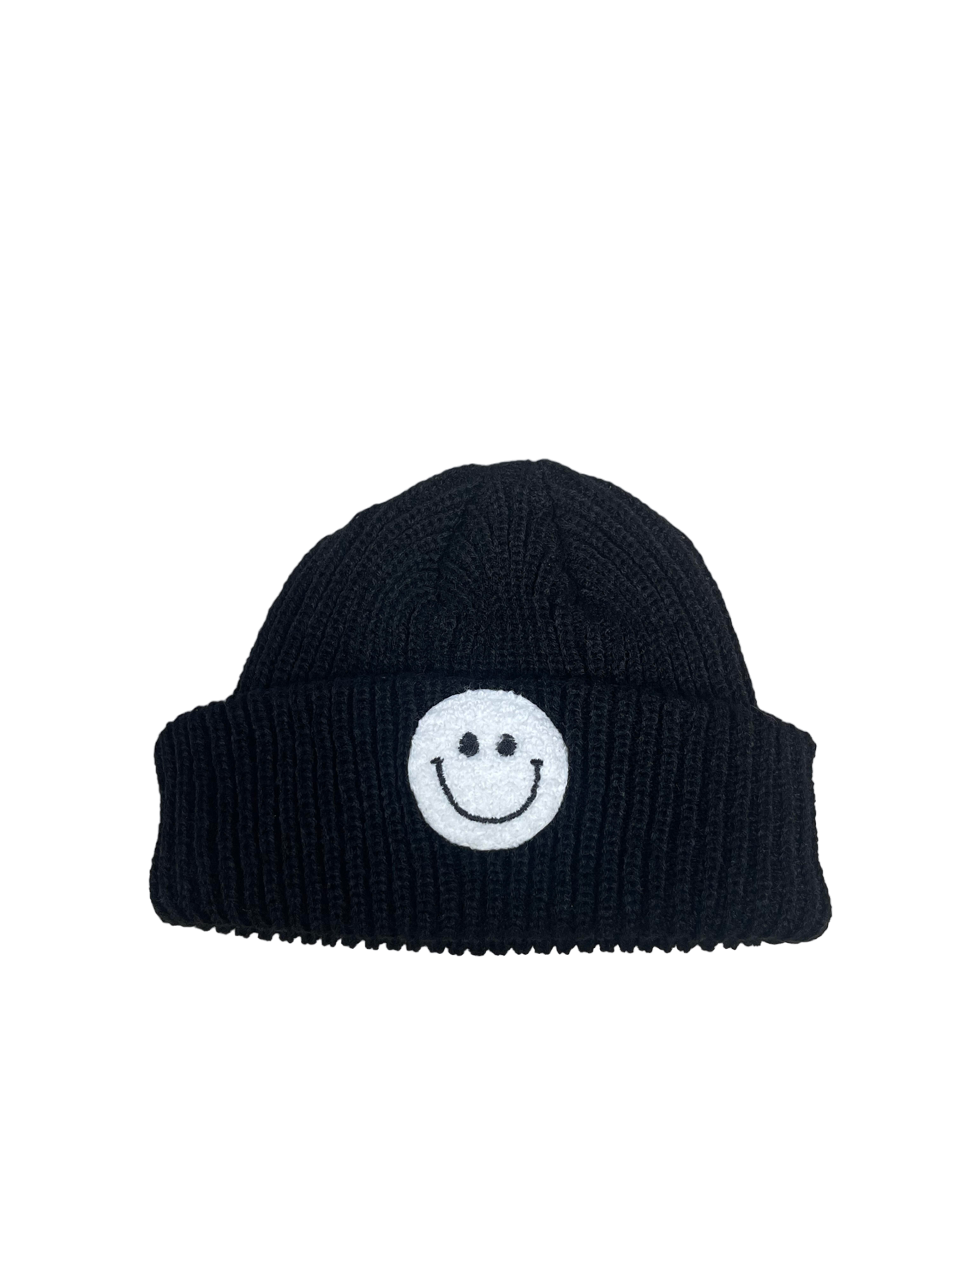 Black Hat With White Smile